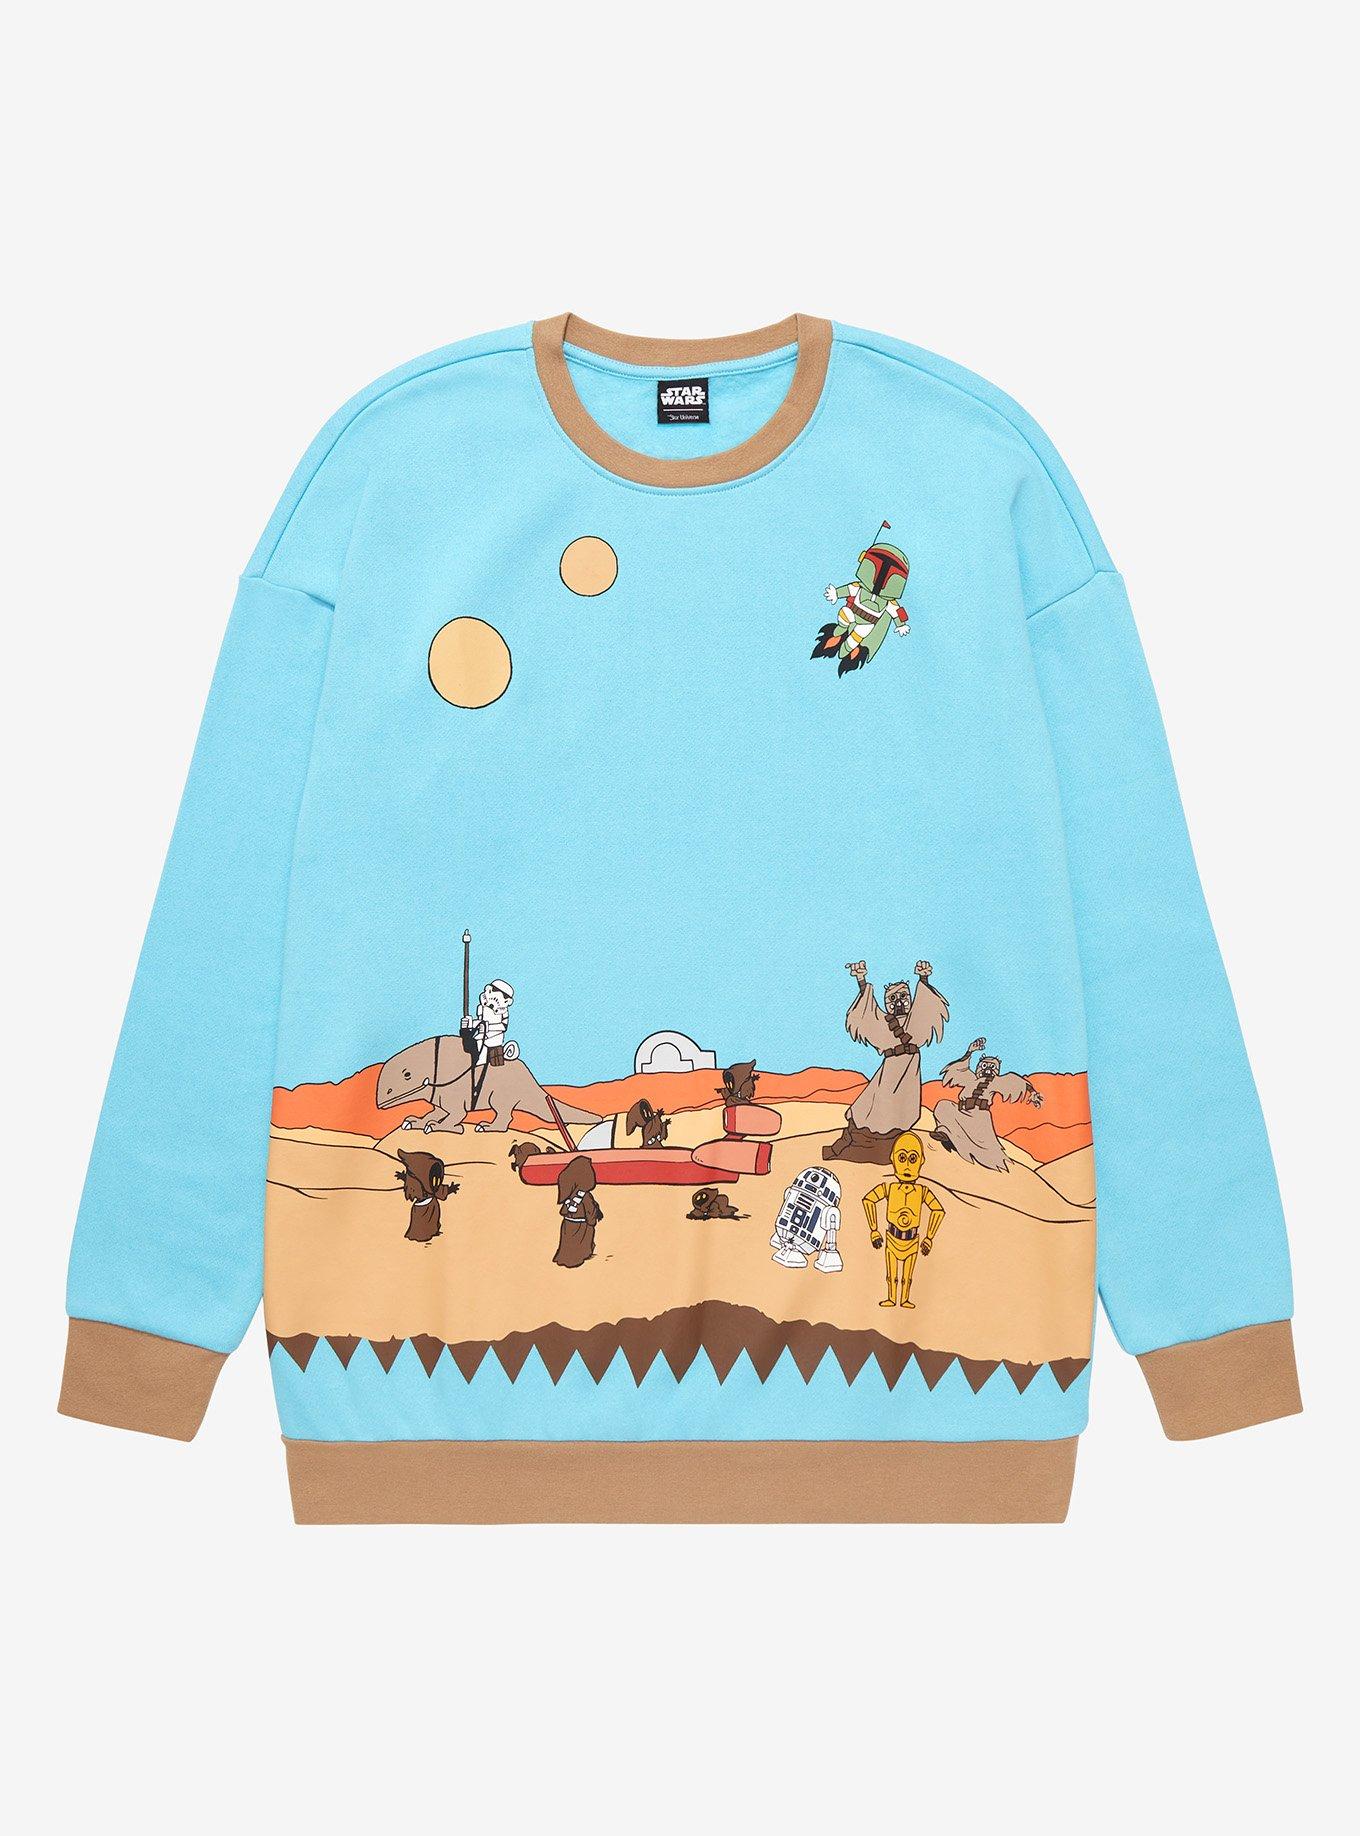 Star Wars Tatooine Group Scene Crewneck - BoxLunch Exclusive | BoxLunch